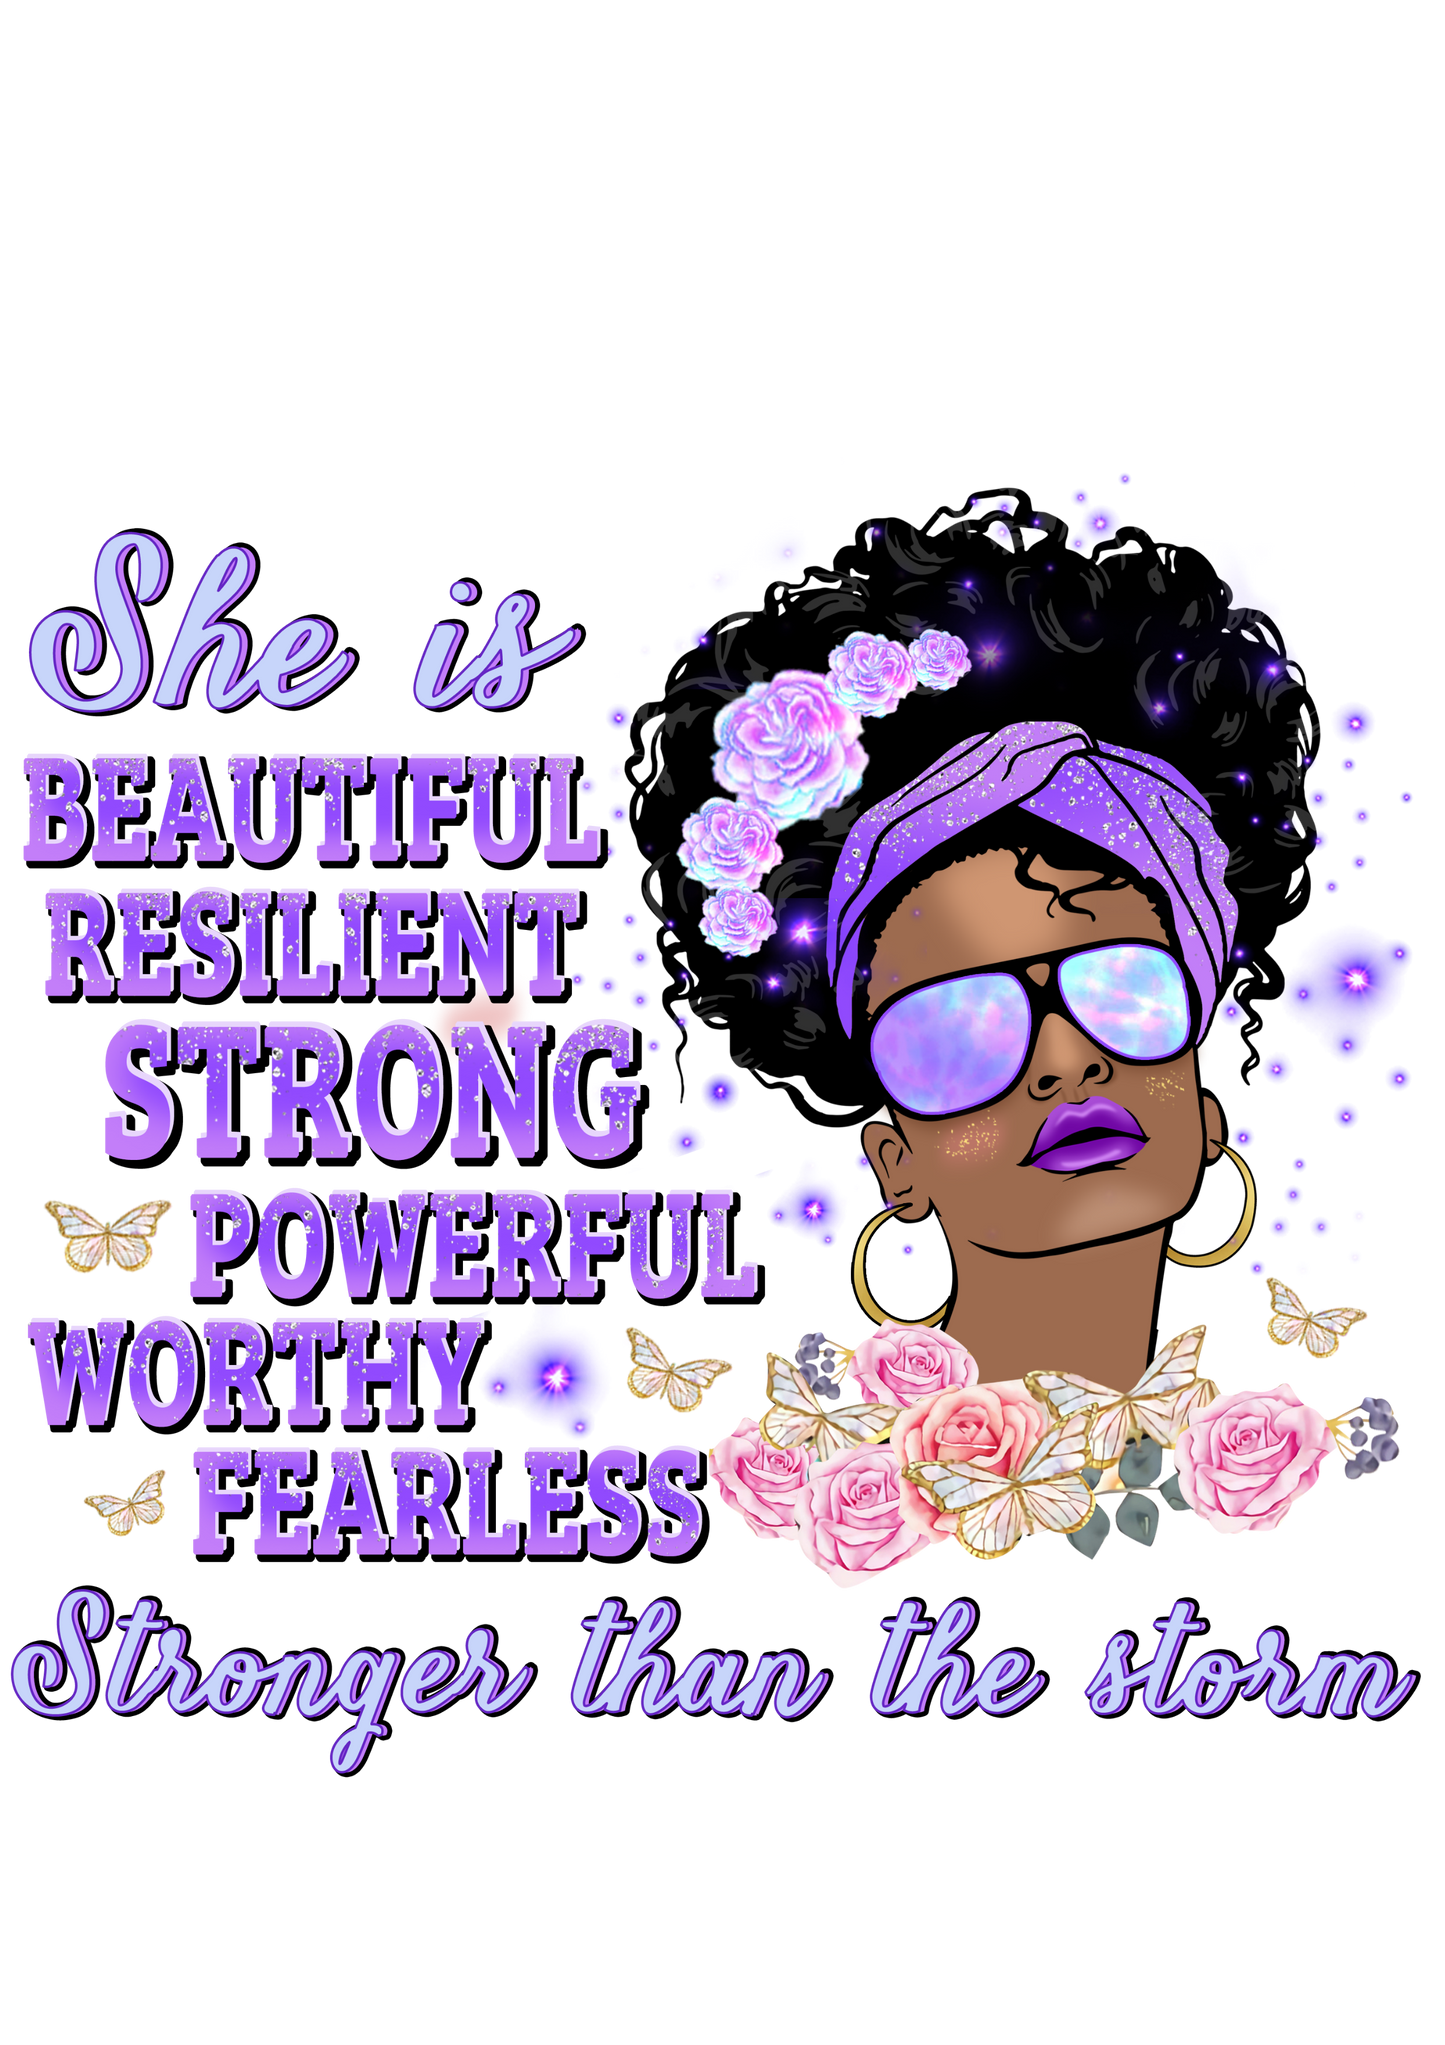 She Is Beautiful Stronger Than The Storm